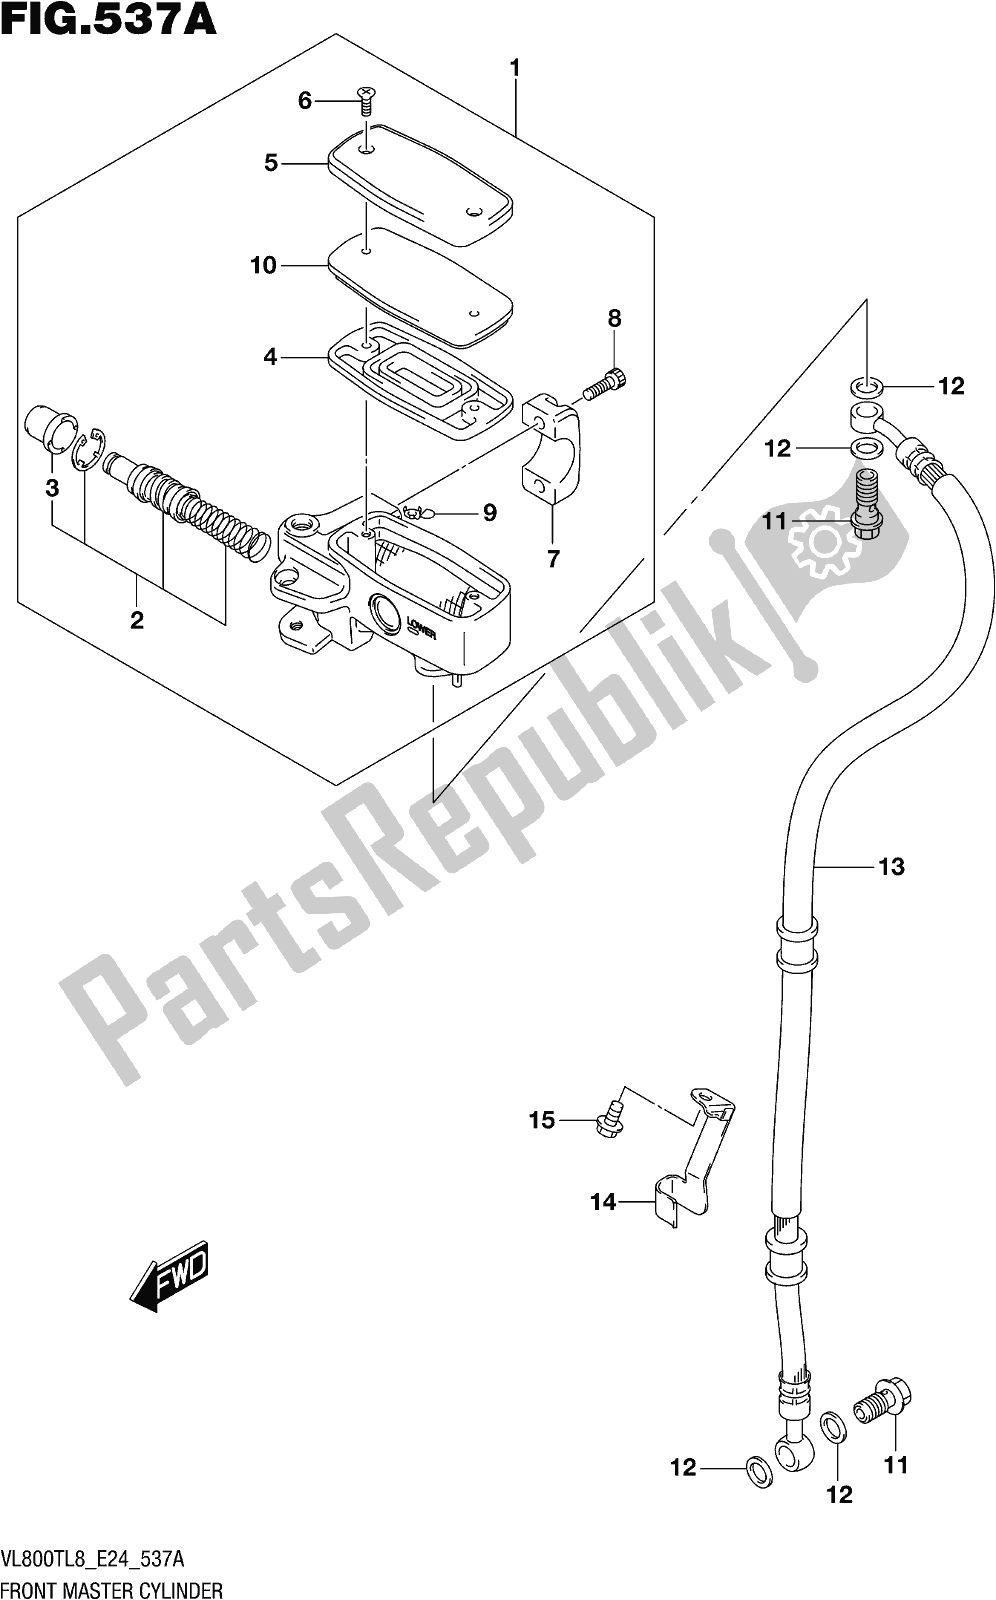 All parts for the Fig. 537a Front Master Cylinder of the Suzuki VL 800T 2018